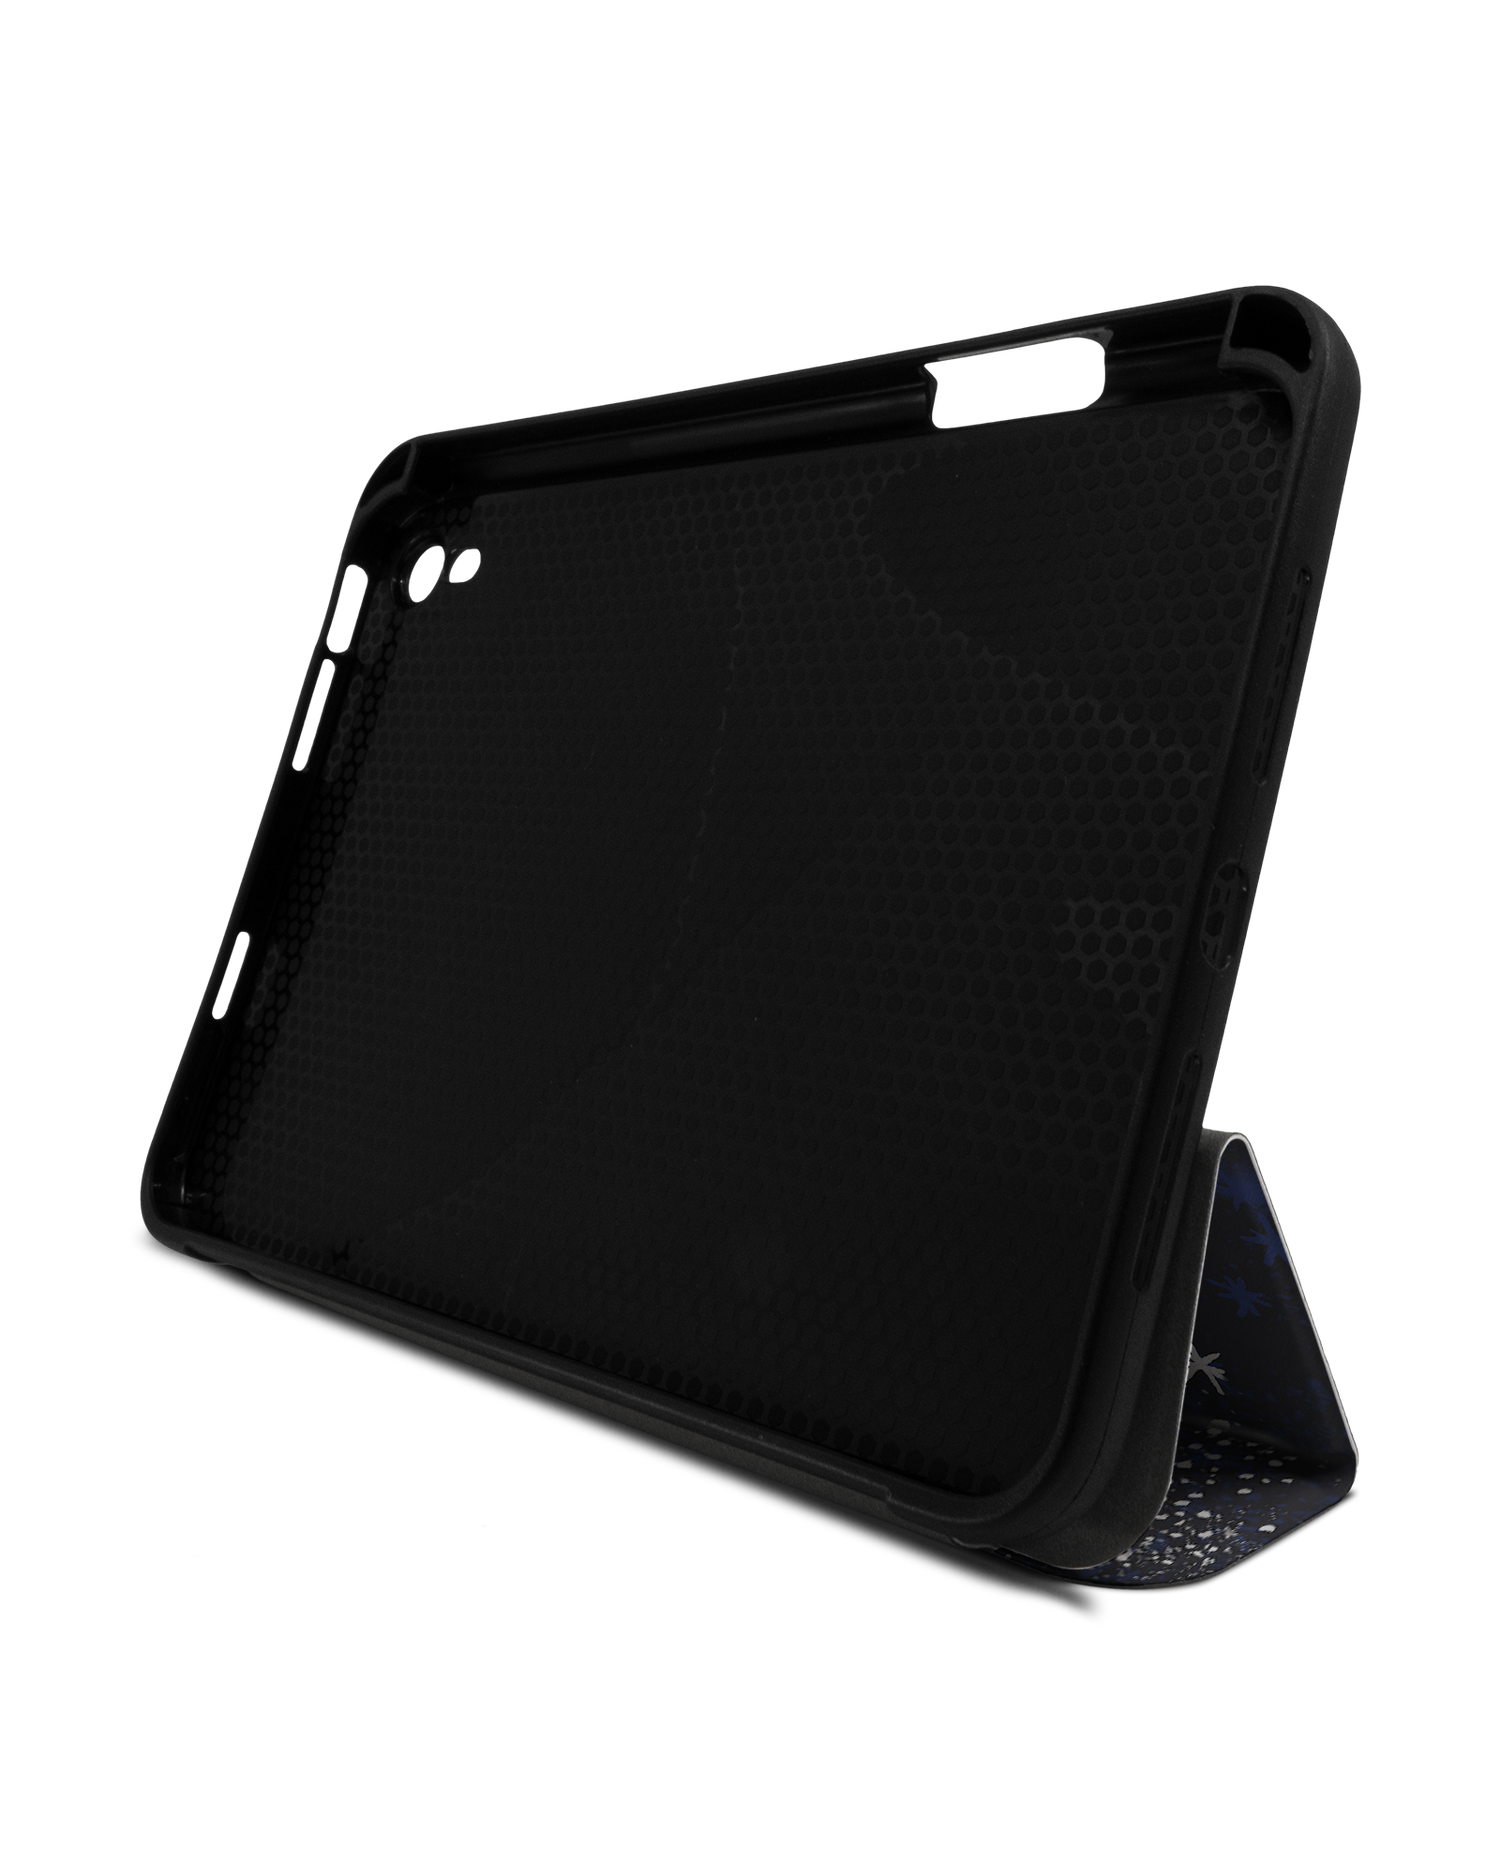 Starry Night Sky iPad Case with Pencil Holder Apple iPad mini 6 (2021): Set up in landscape format (front view)